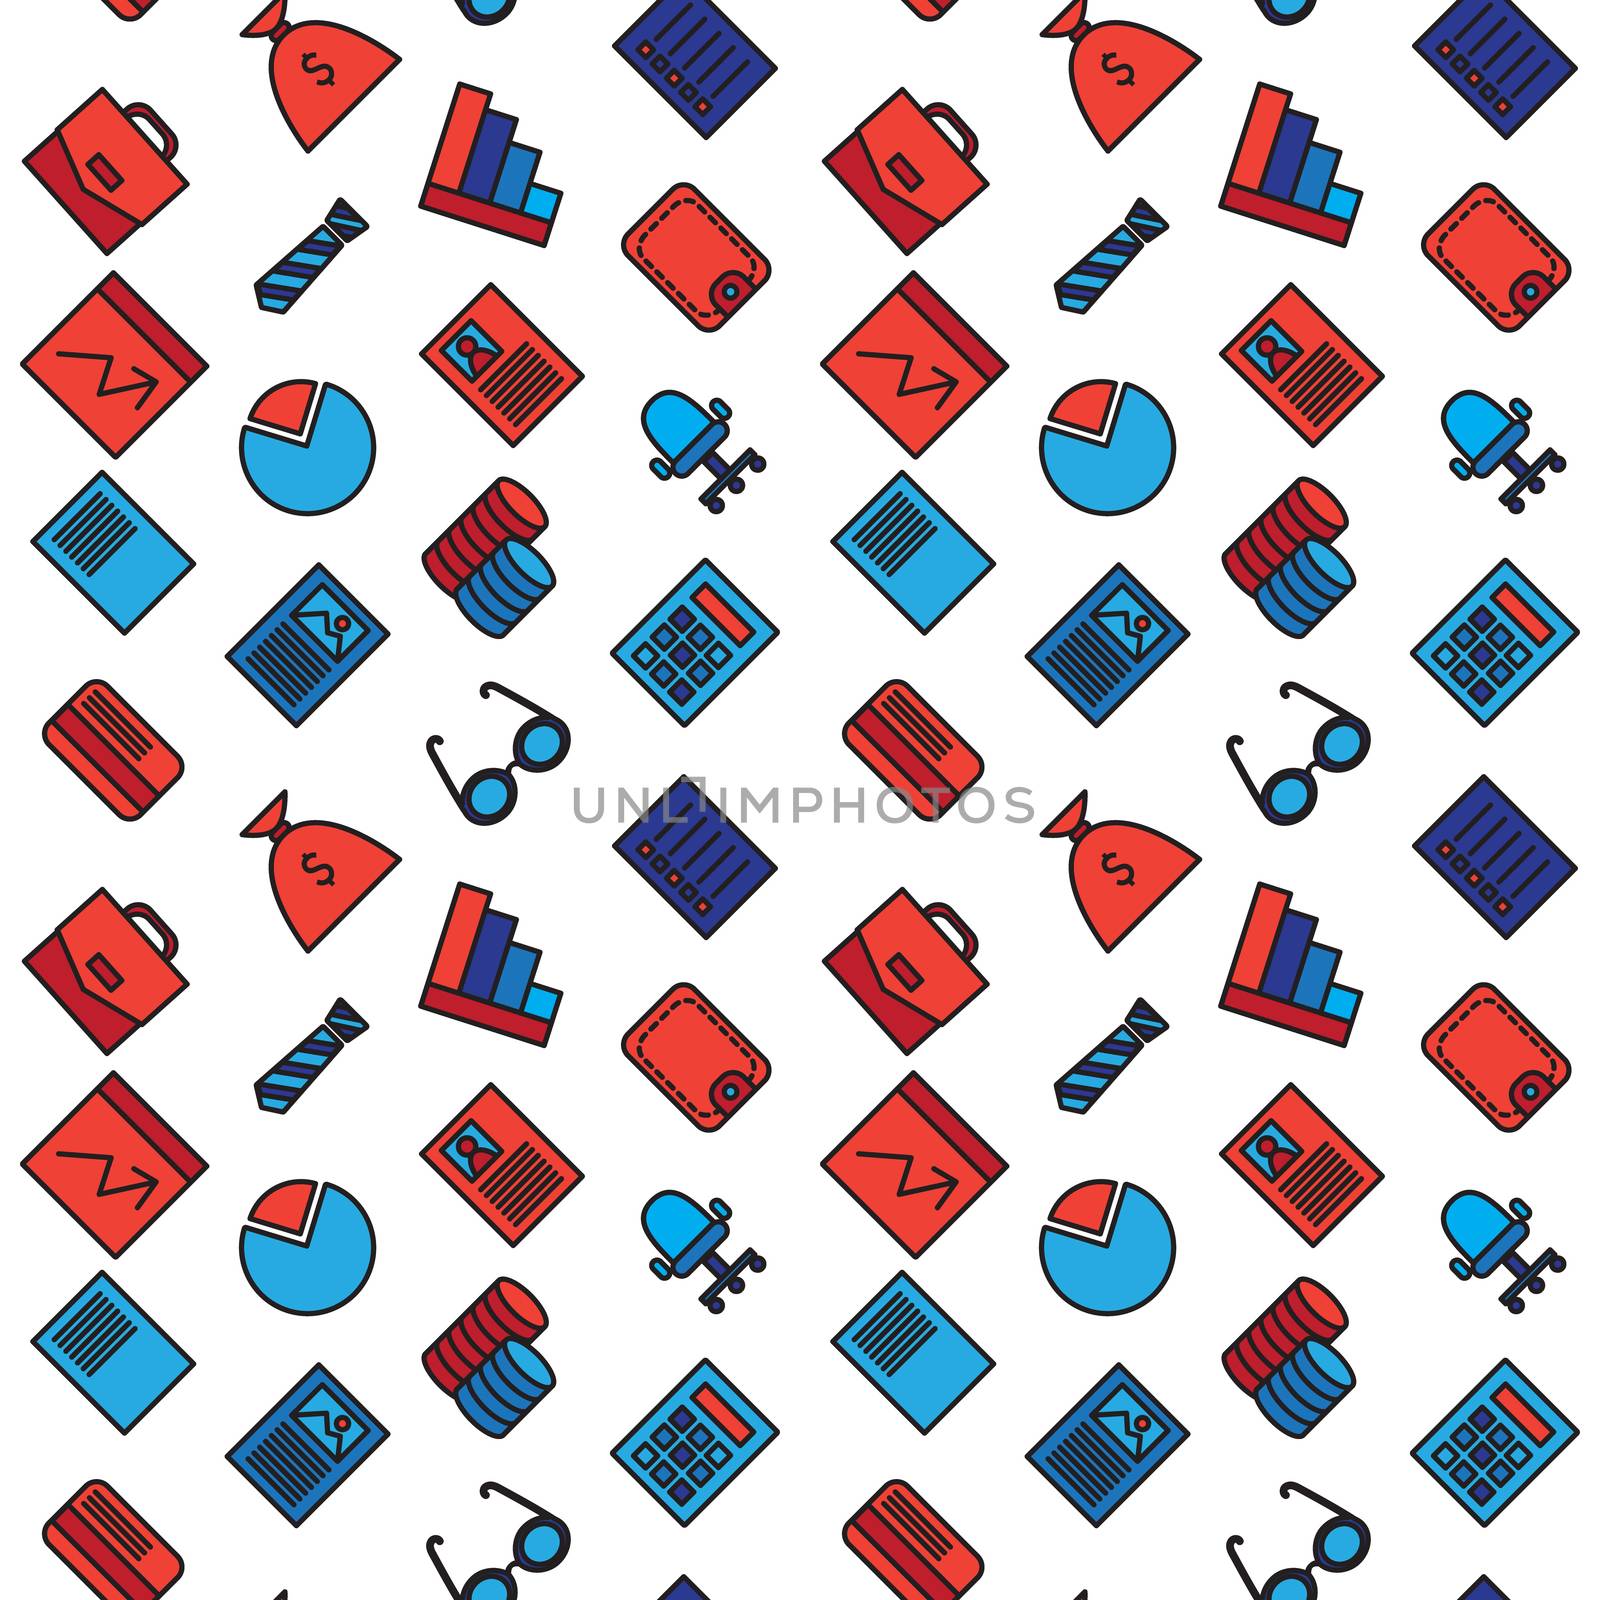 Business icons seamless pattern. Office and document symbols. Vector